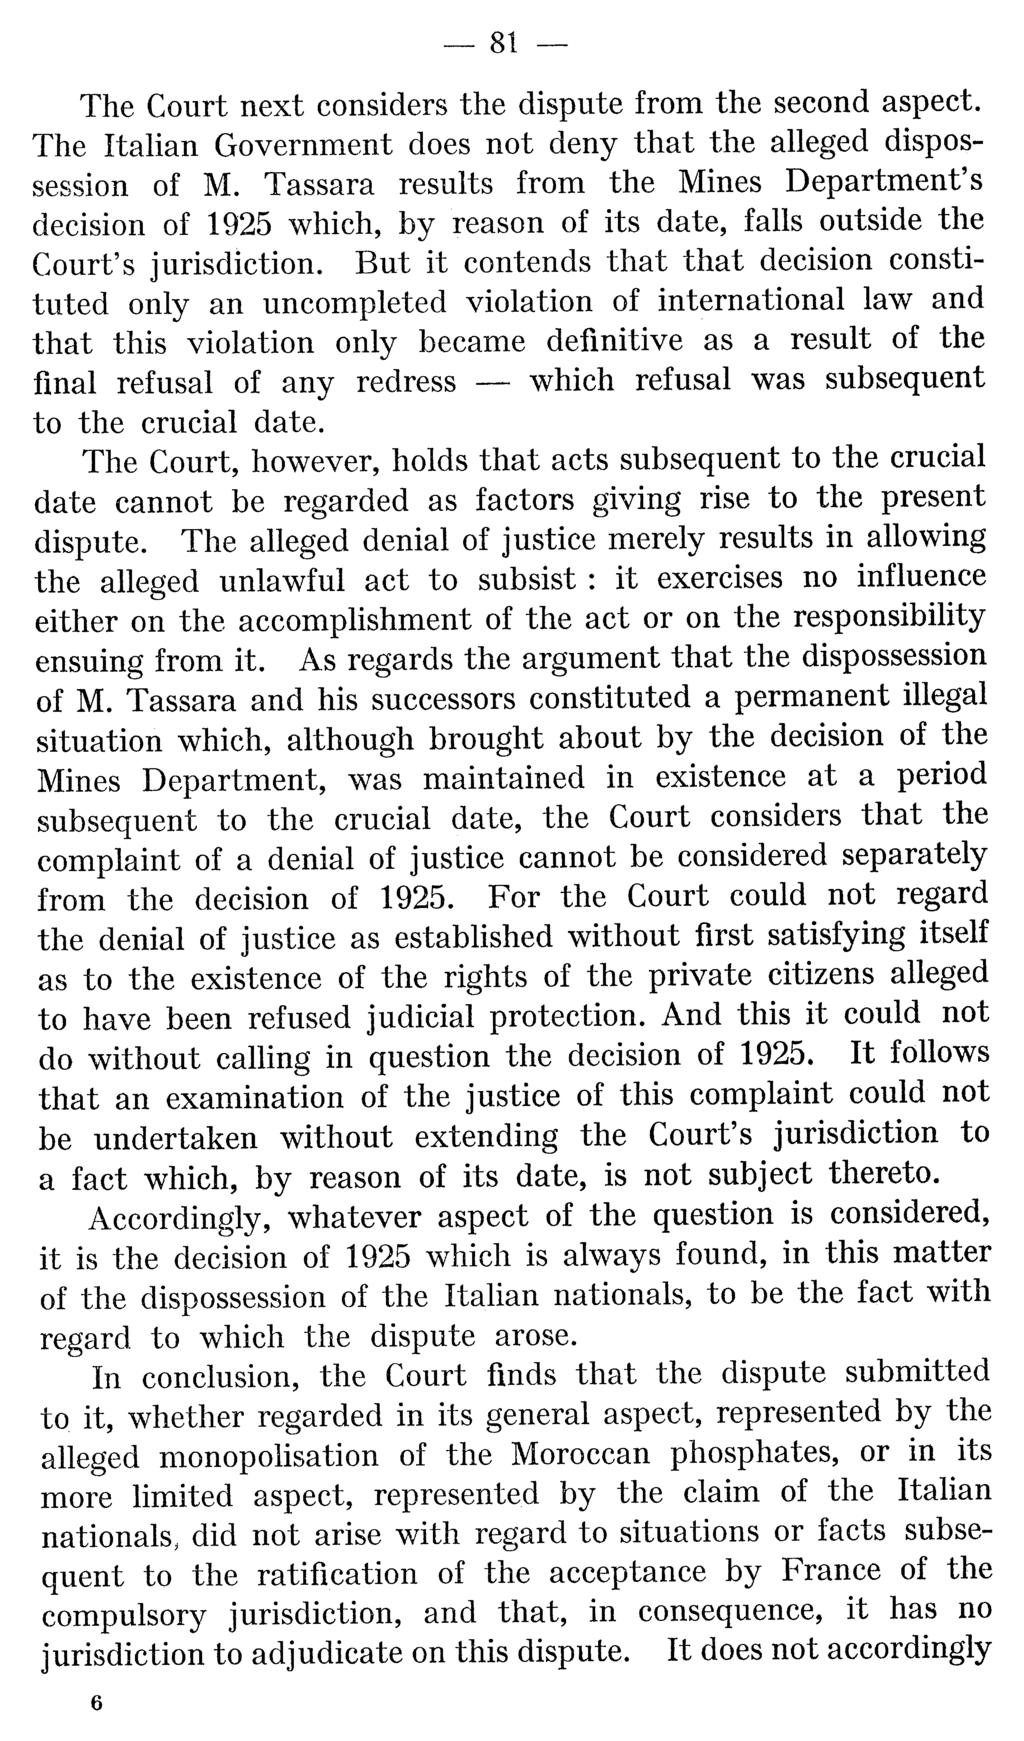 81 - The Court next considers the dispute from the second aspect. The Italian Government does not deny that the alleged dispossession of M.